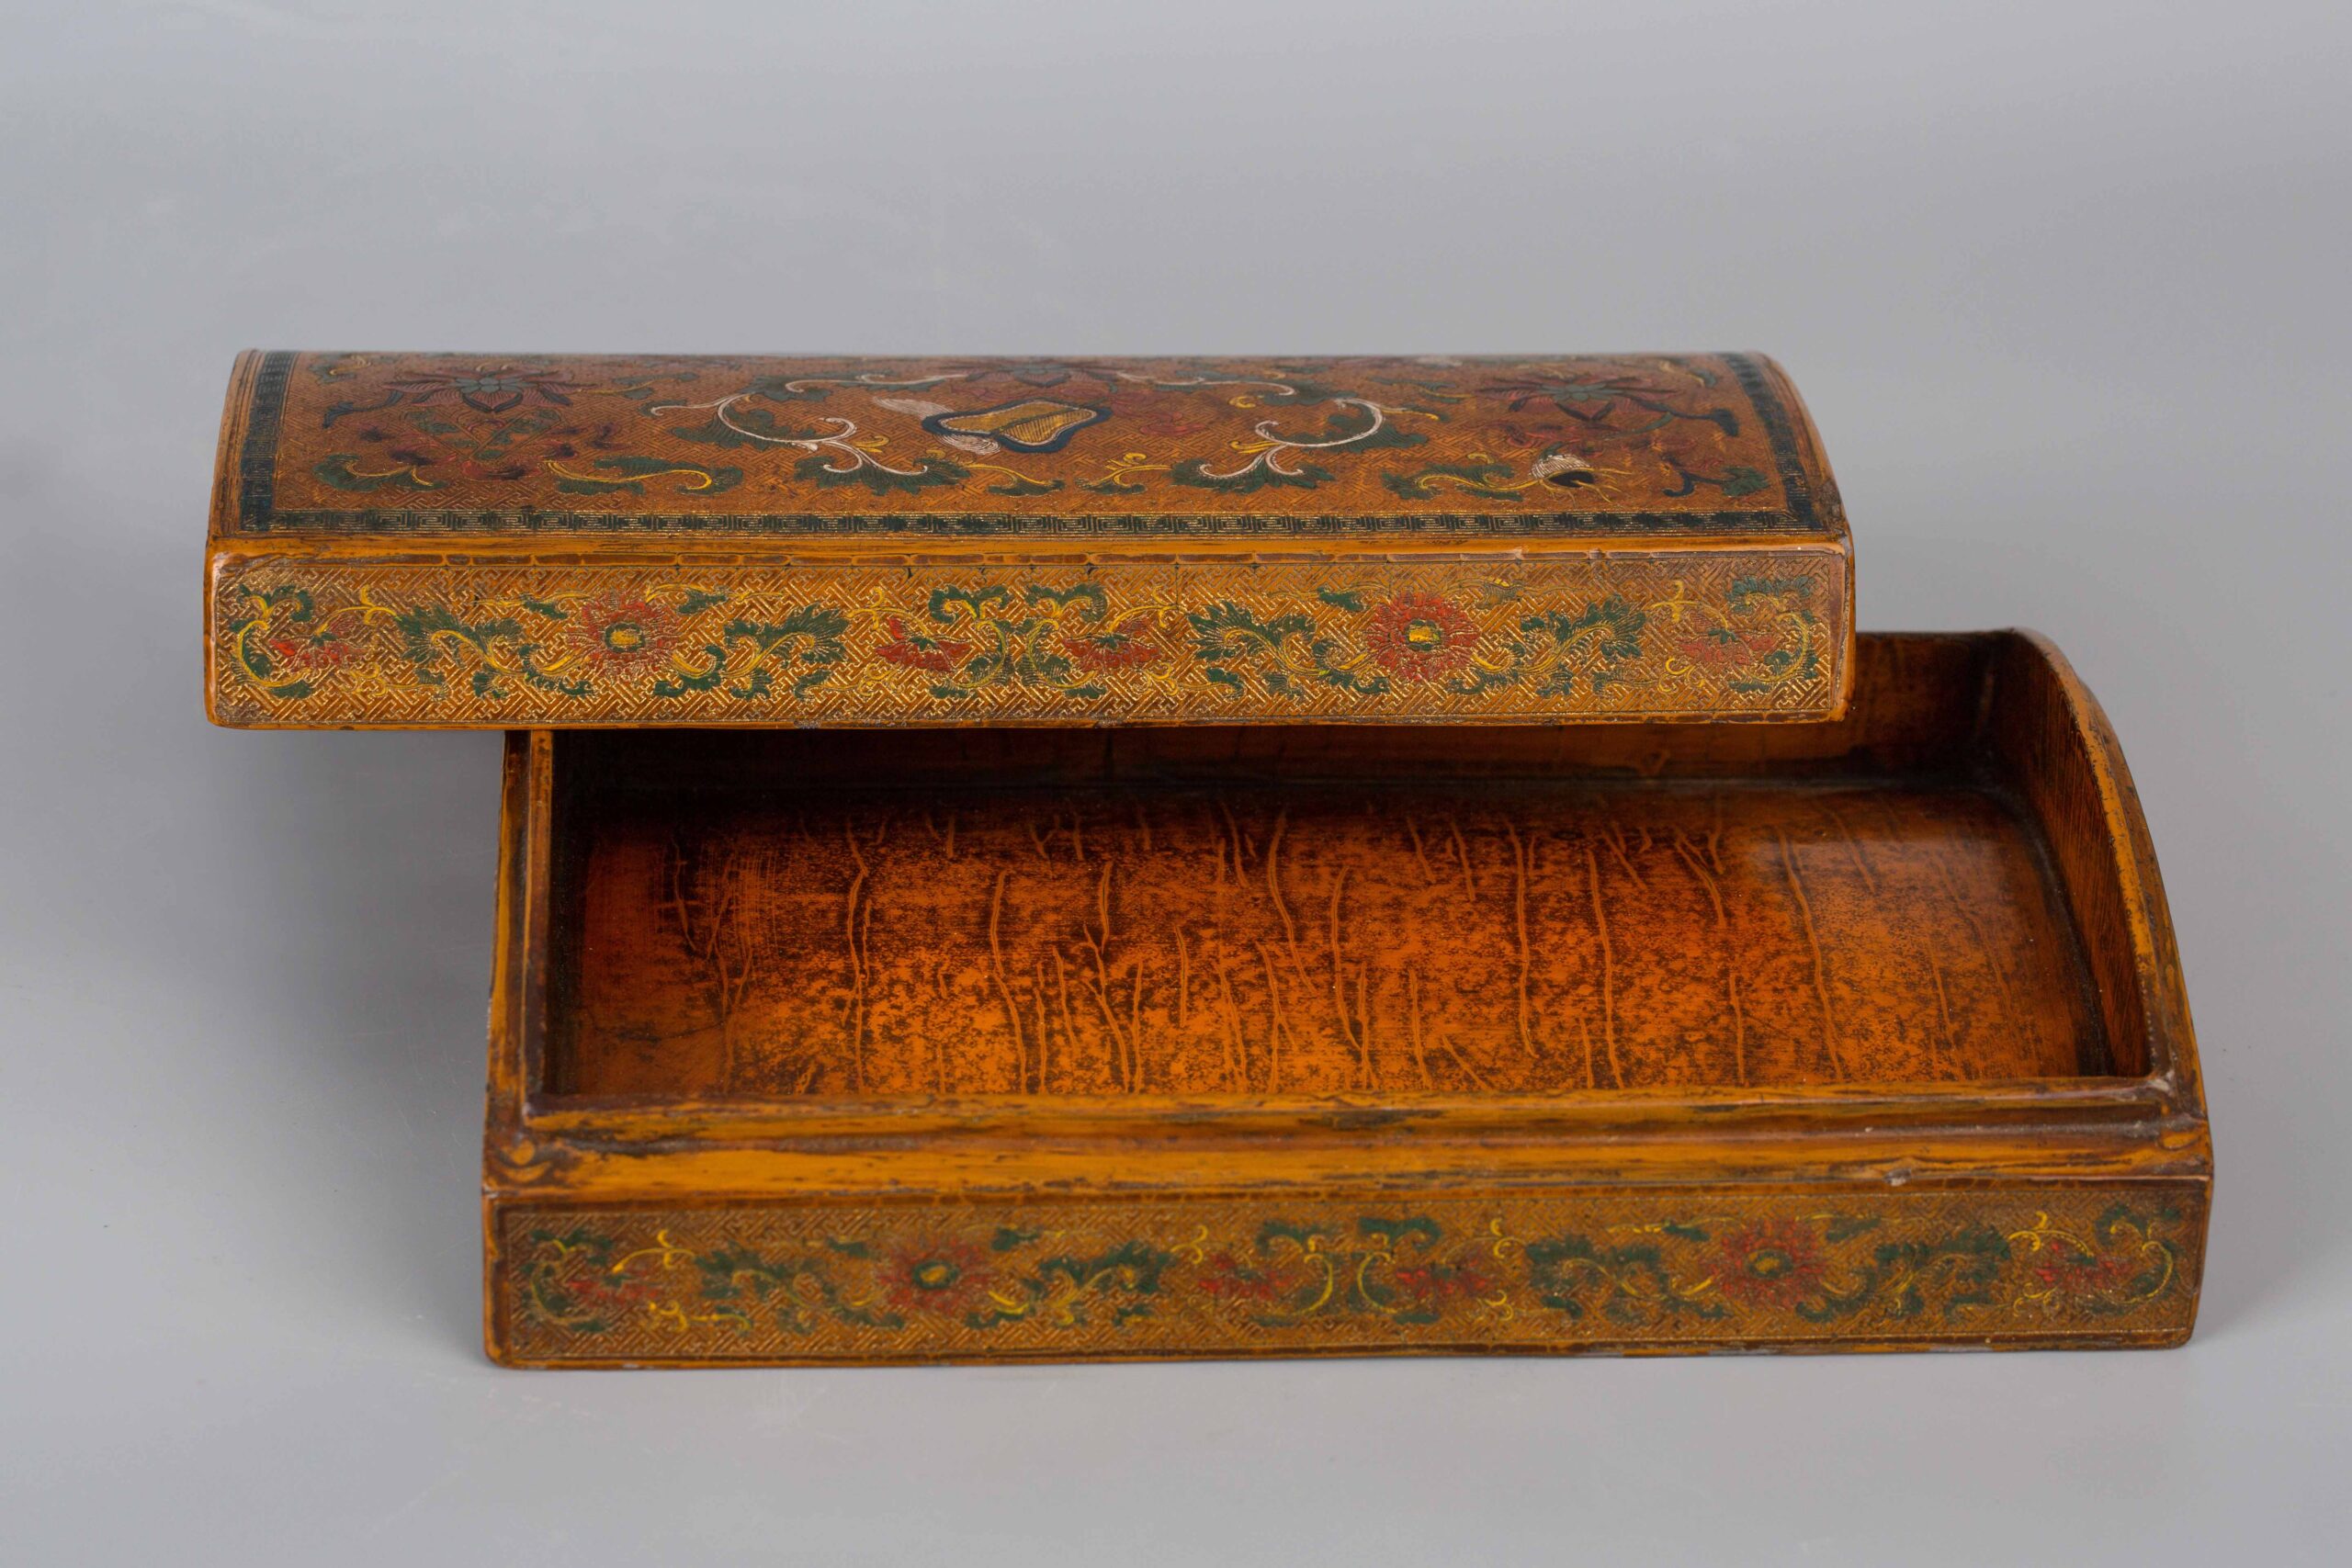 Lacquer ware book collection box with Daqing Qianlong Year Made 